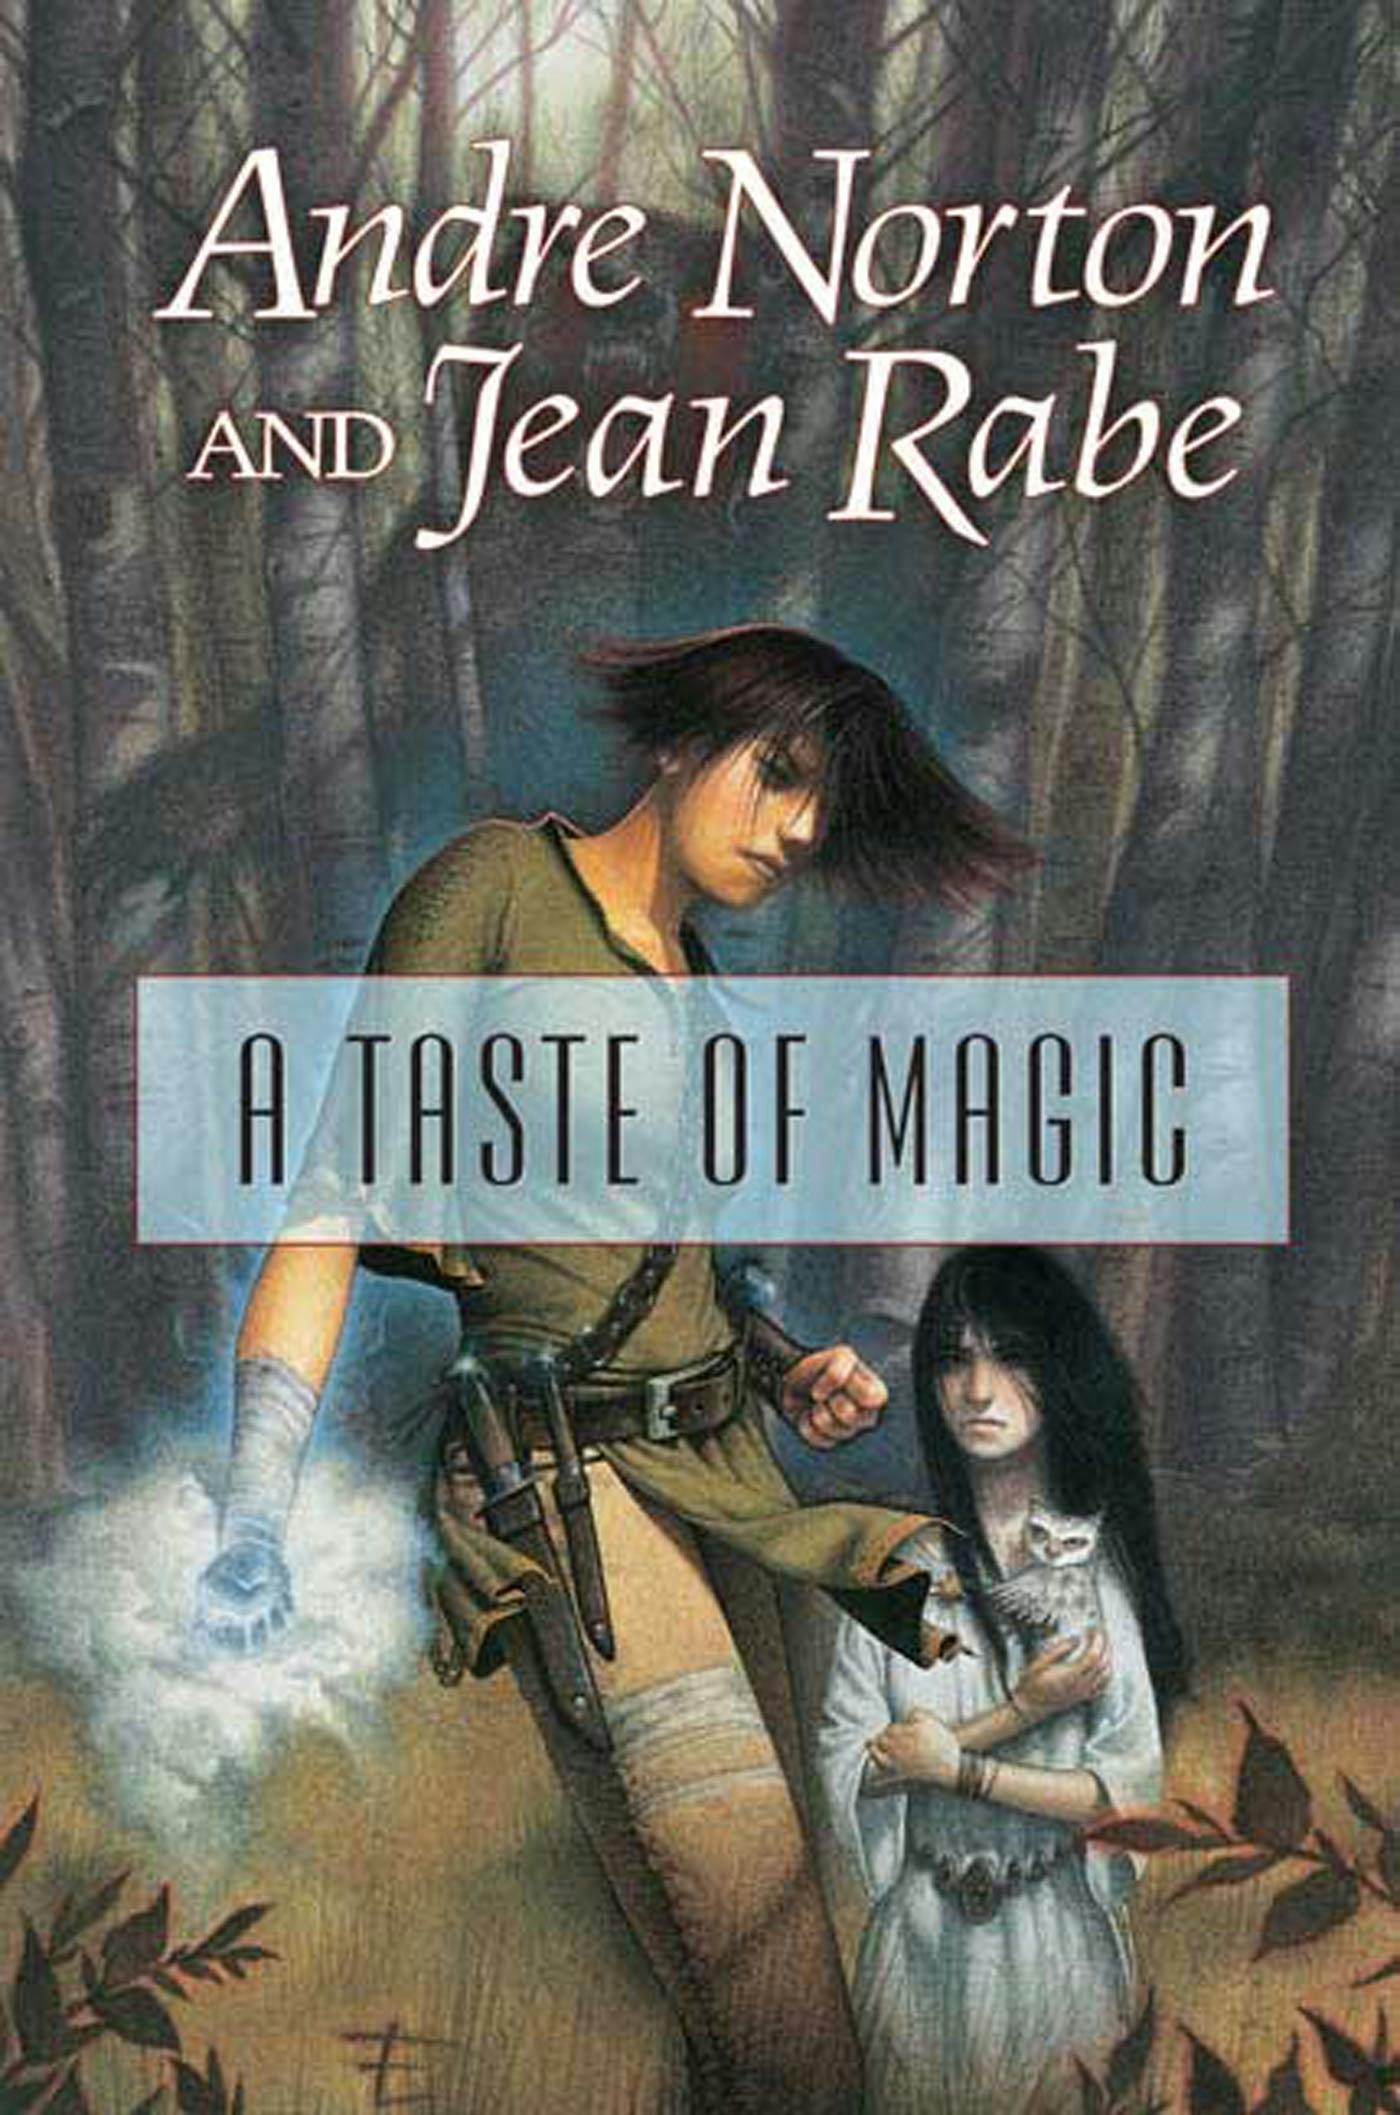 Cover for the book titled as: A Taste of Magic